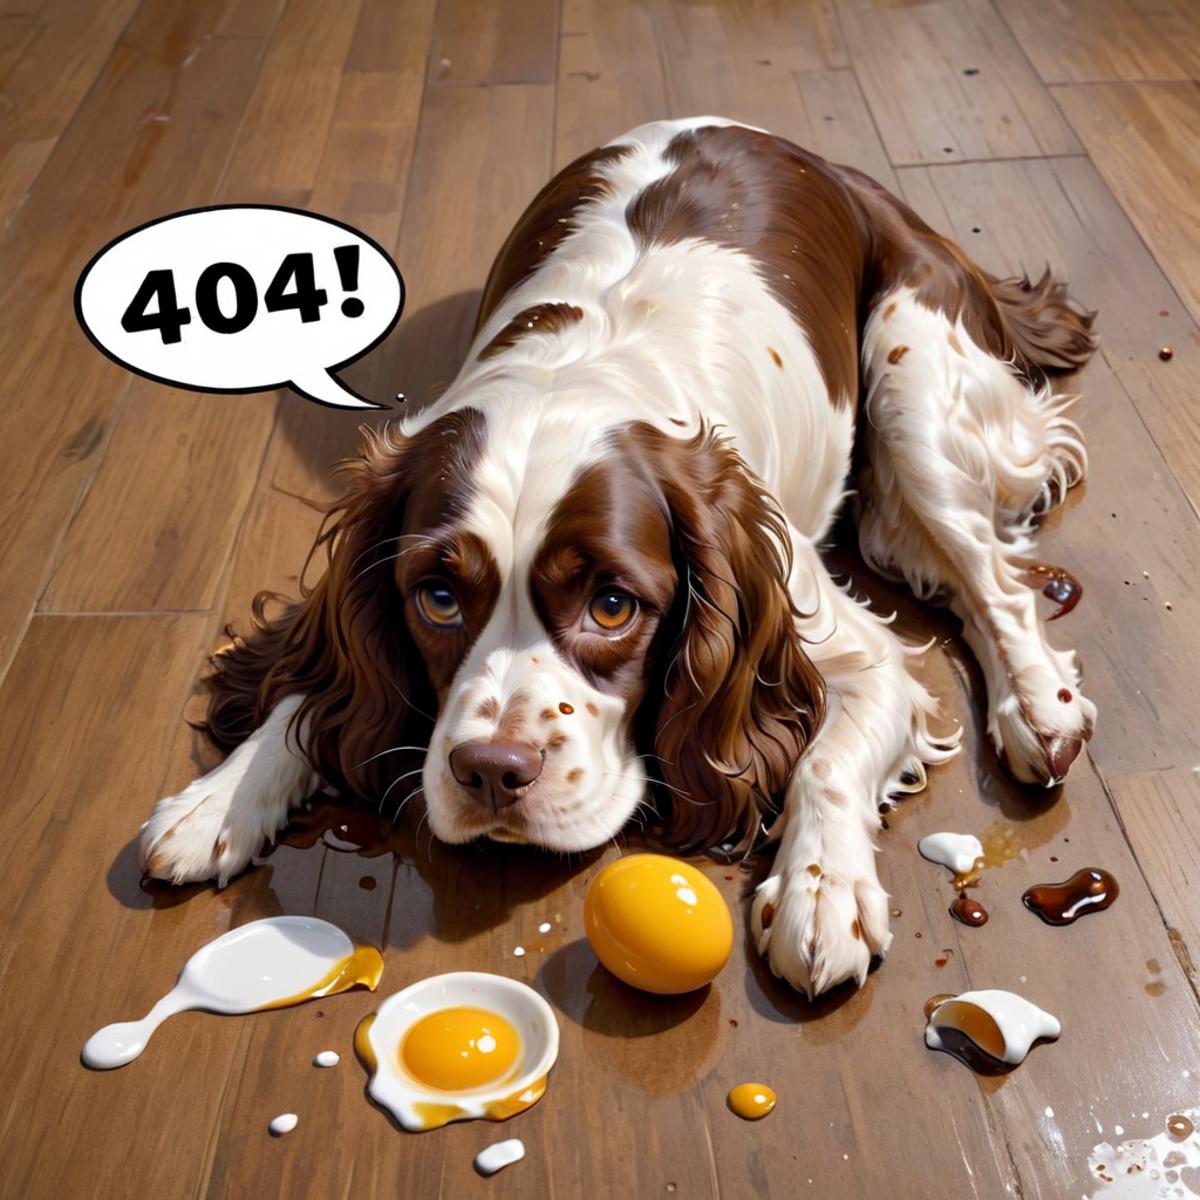 A brown and white dog laying on a hardwood floor with a broken egg and spilled yolk.